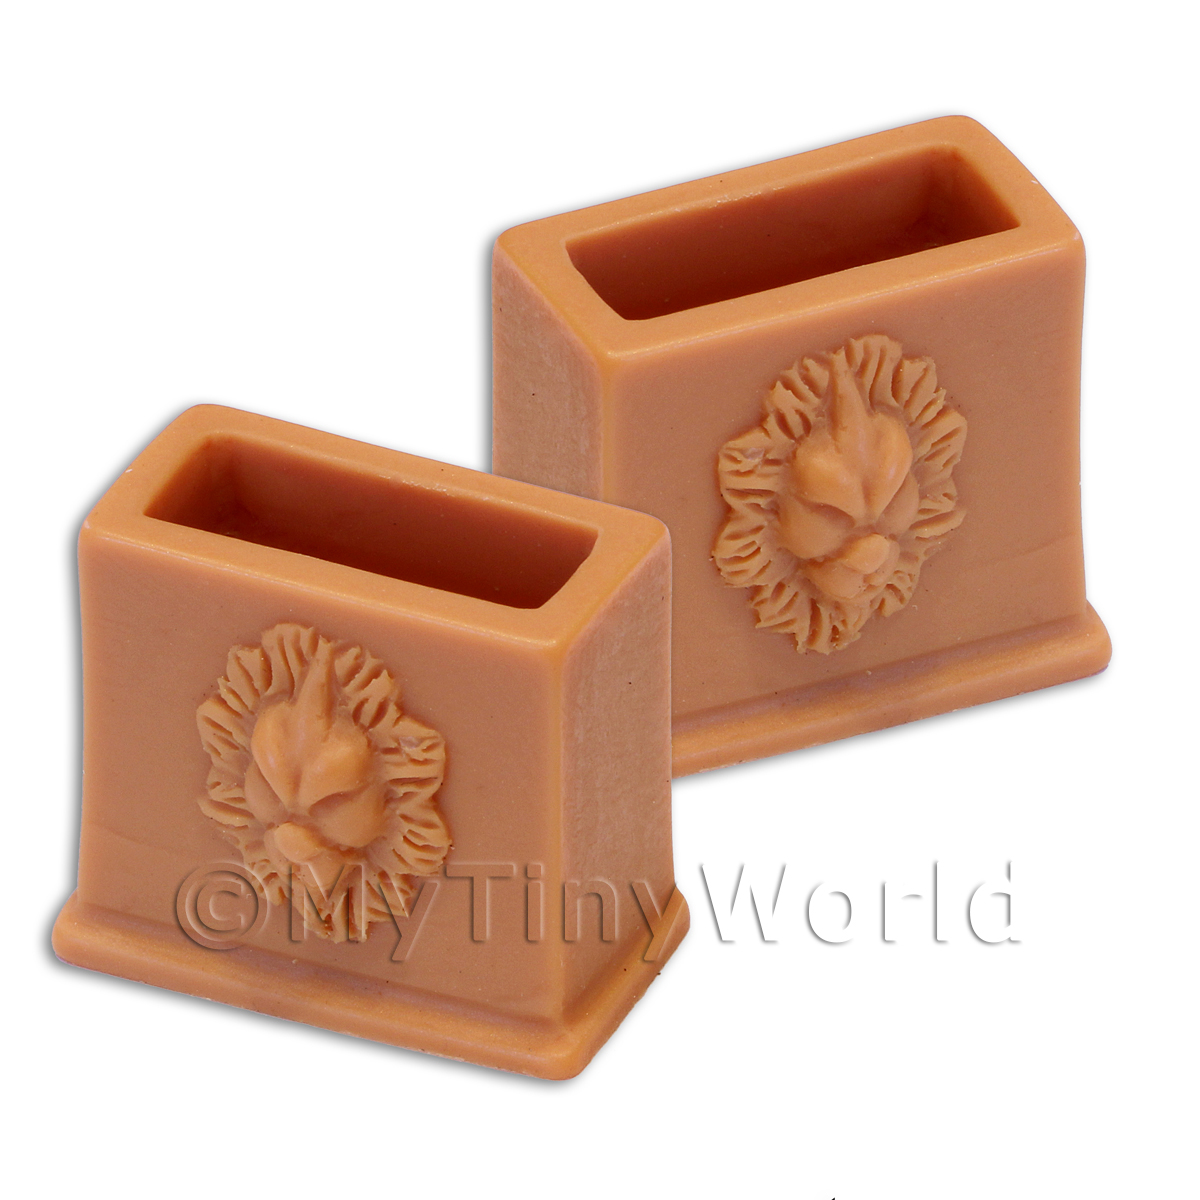 Square Box Silicone Mold | Flower Pot Mould | Small Container Mold | Epoxy  Resin Mold | UV Resin Craft Supplies (50mm x 33mm)